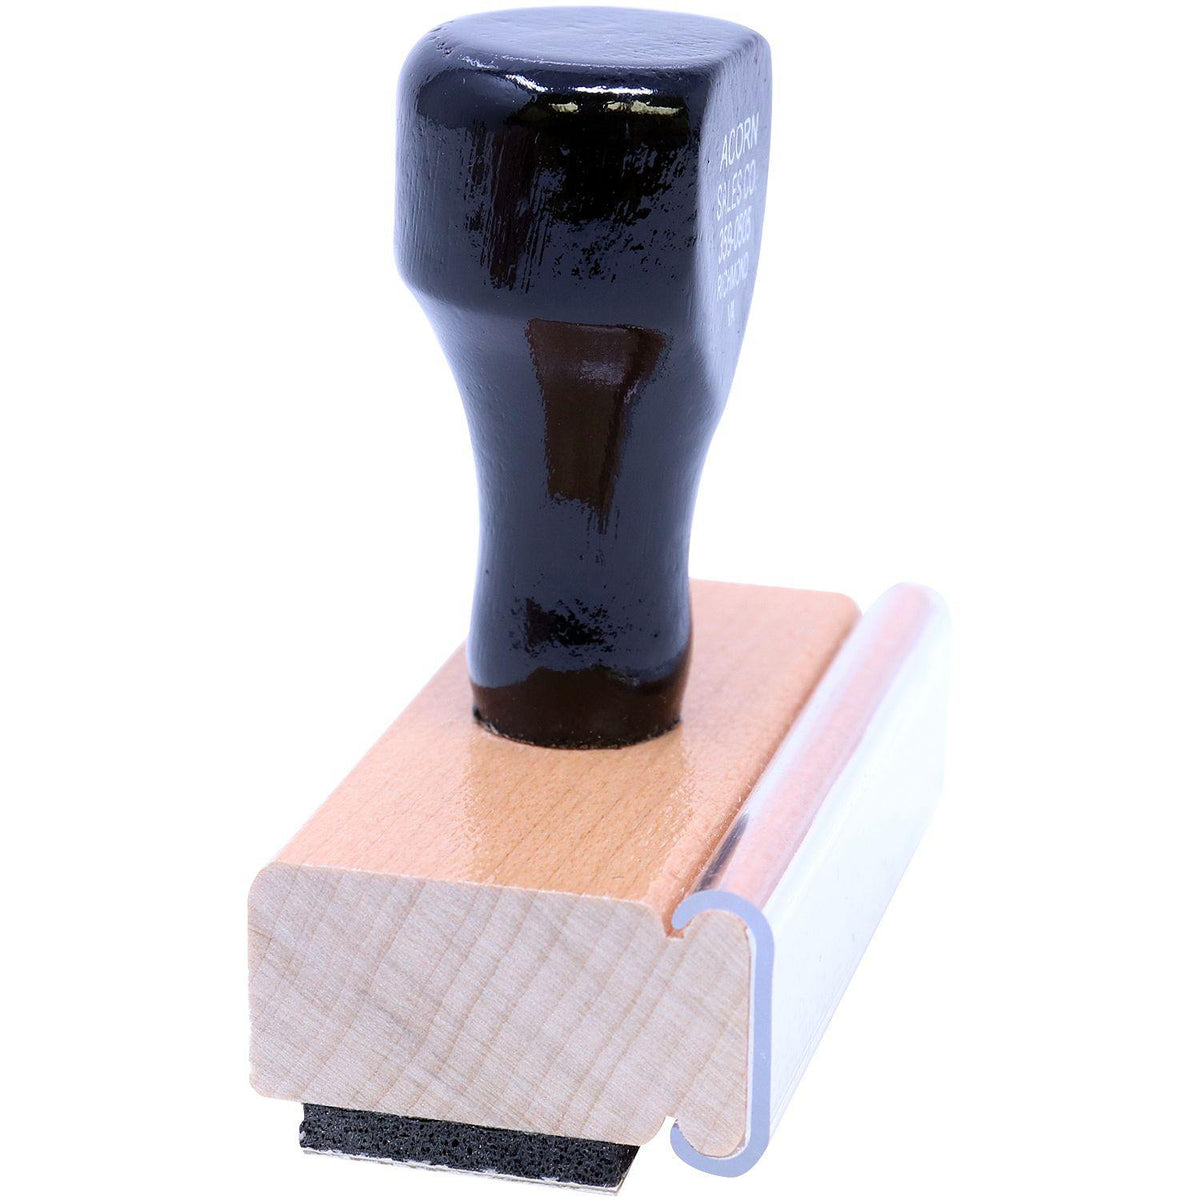 Side View of Large Narrow Void Rubber Stamp at an Angle